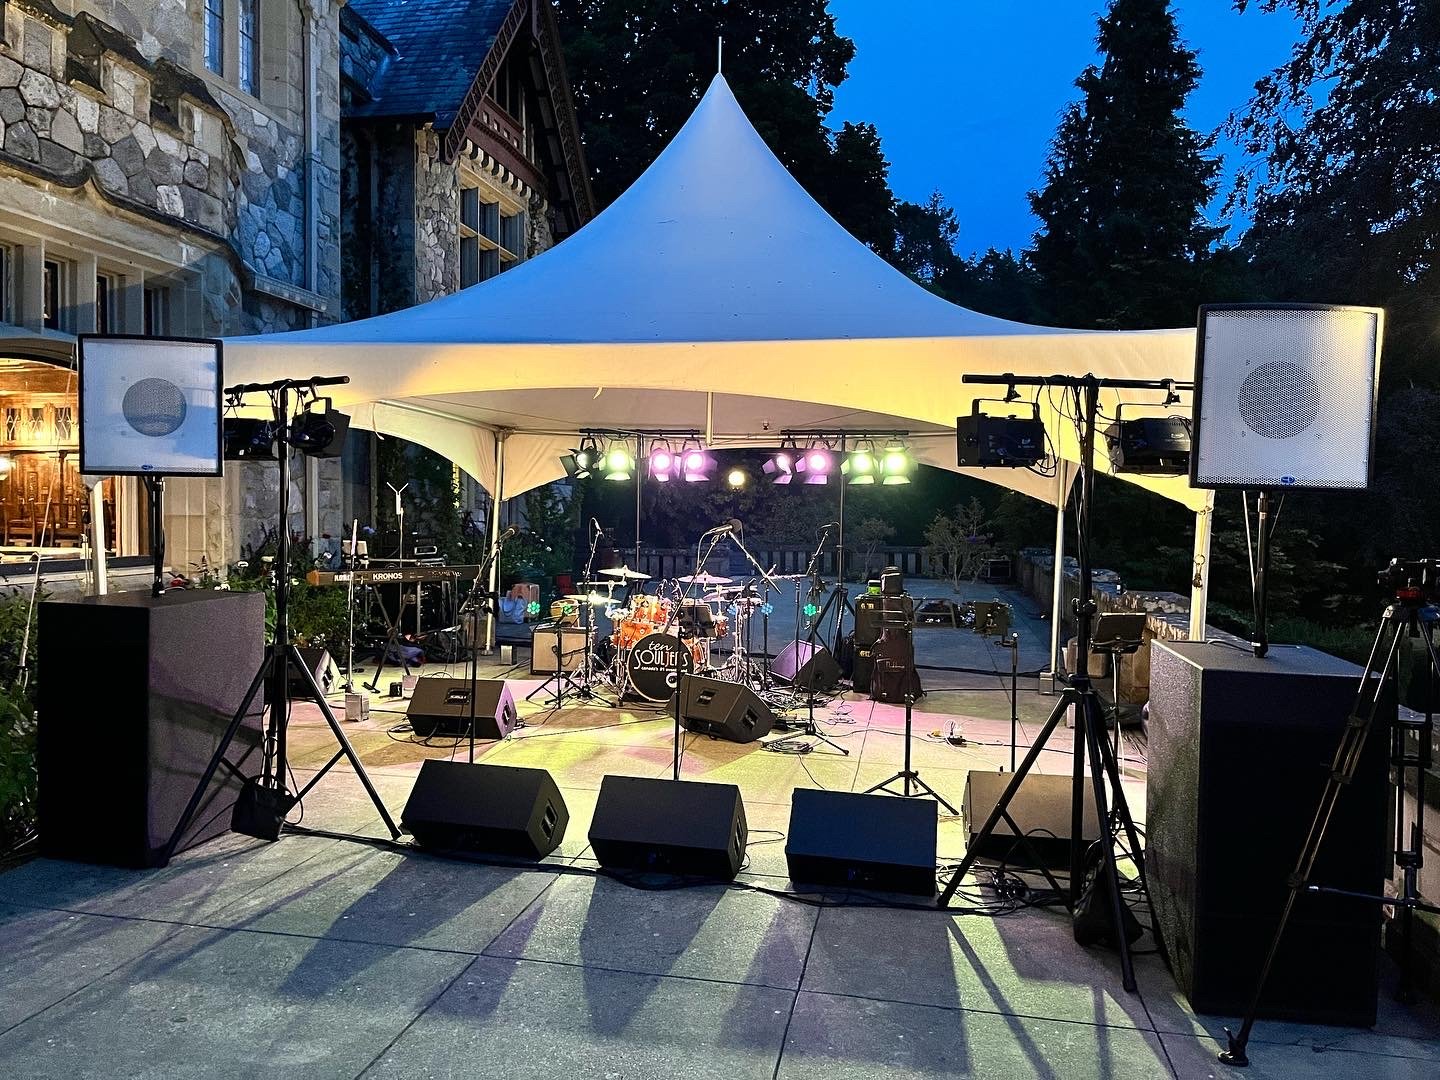 Post Soundcheck ready for Ten Souljers to perform live at Hatley Castle Victoria for a private wedding, 2022